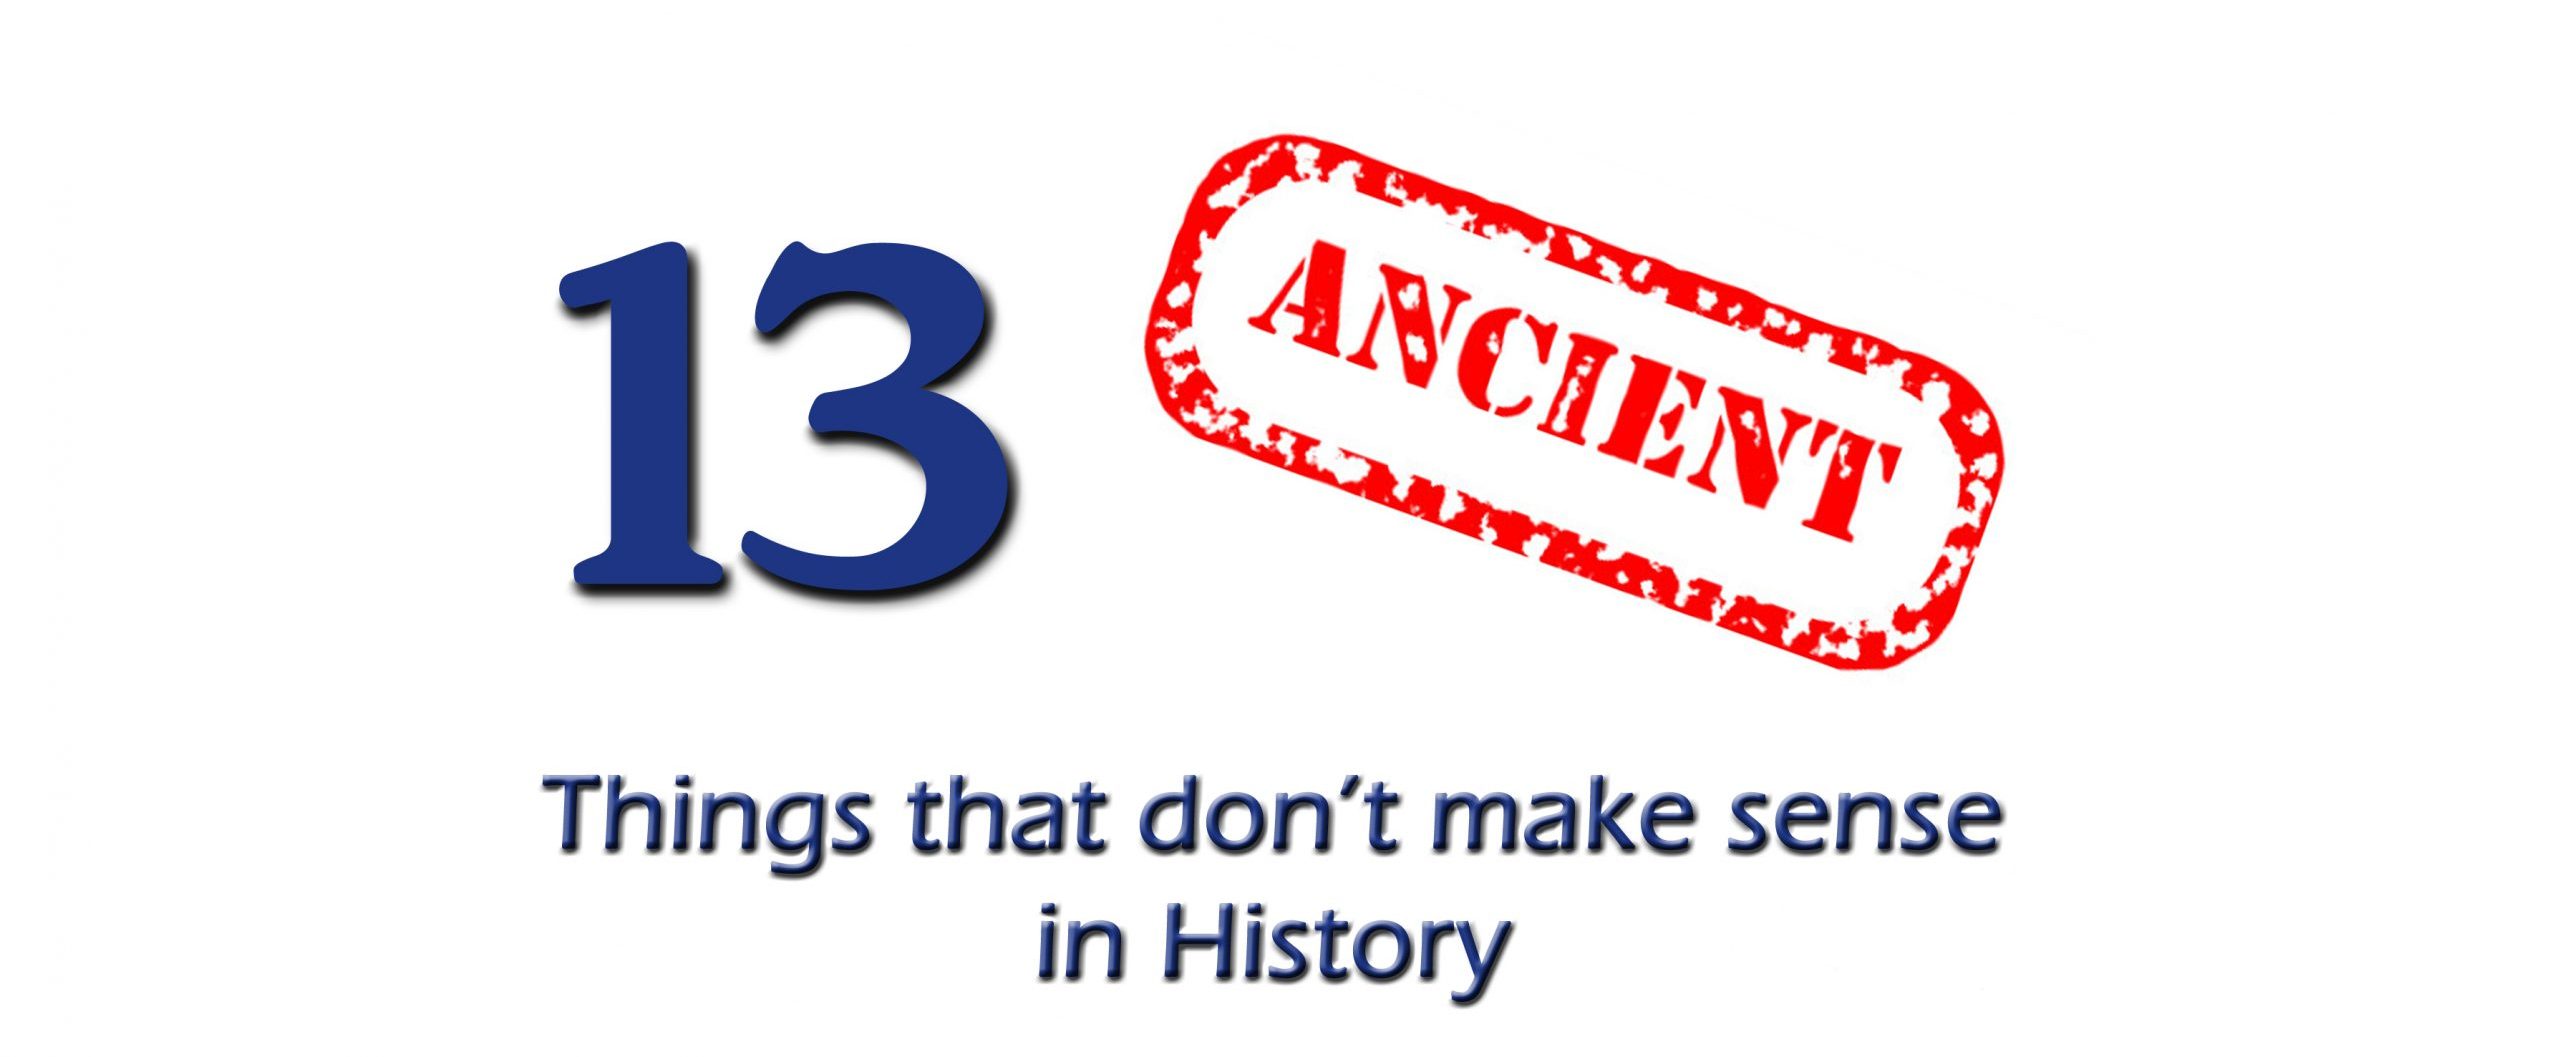 13 Things That Don't make sense in History